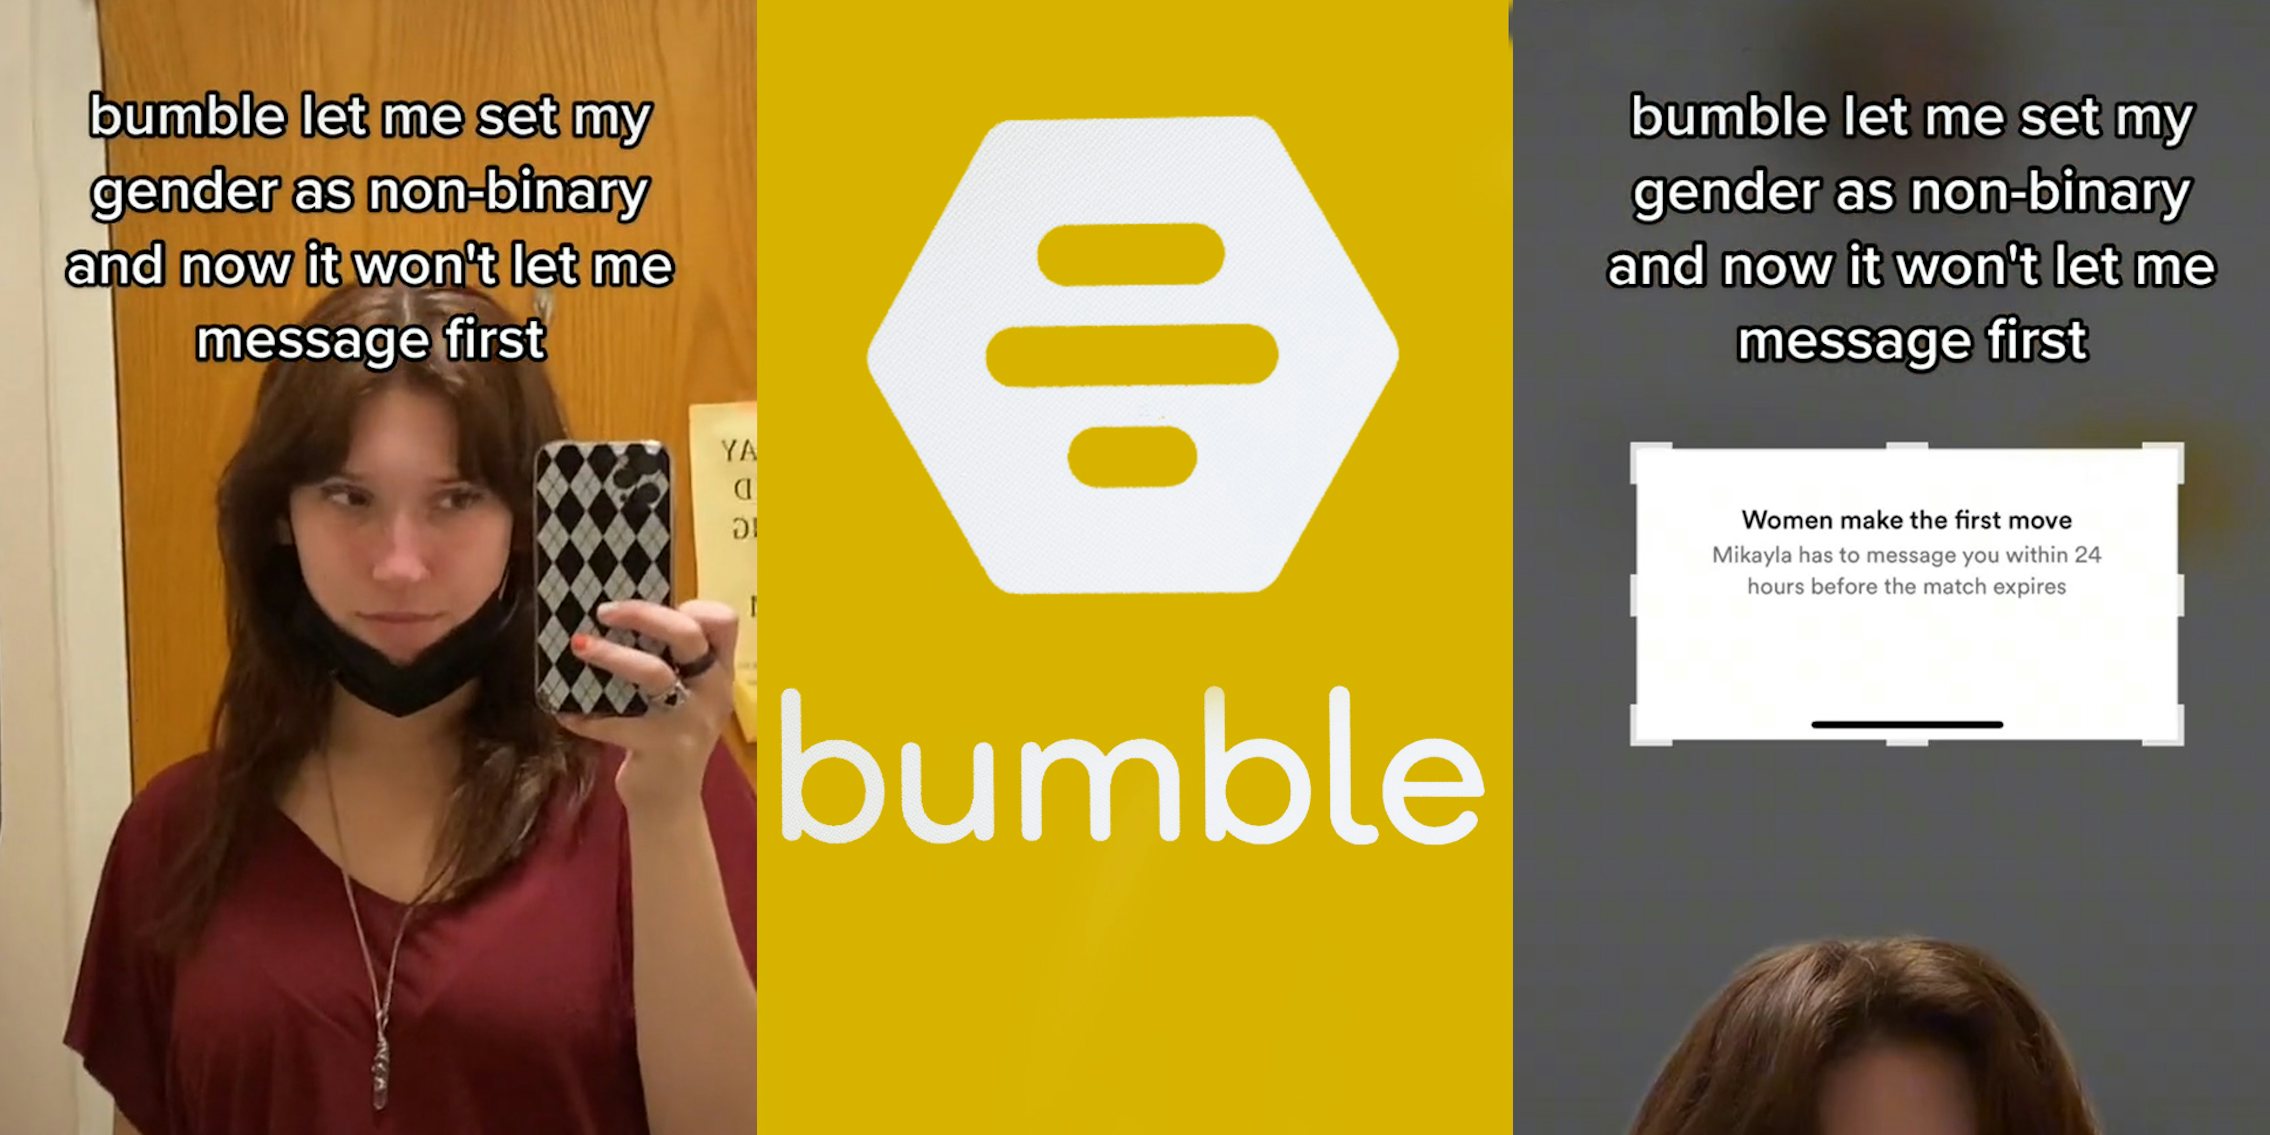 woman posing in mirror caption 'bumble let me set my gender as non-binary and now it won't let me message first' (l) bumble logo on yellow background (c) woman greenscreen tiktok over bumble screen 'women make the first move Mikayla has to message you within 24 hours before match expires' caption 'bumble let me set my gender as non-binary and now it won't let me message first' (r)